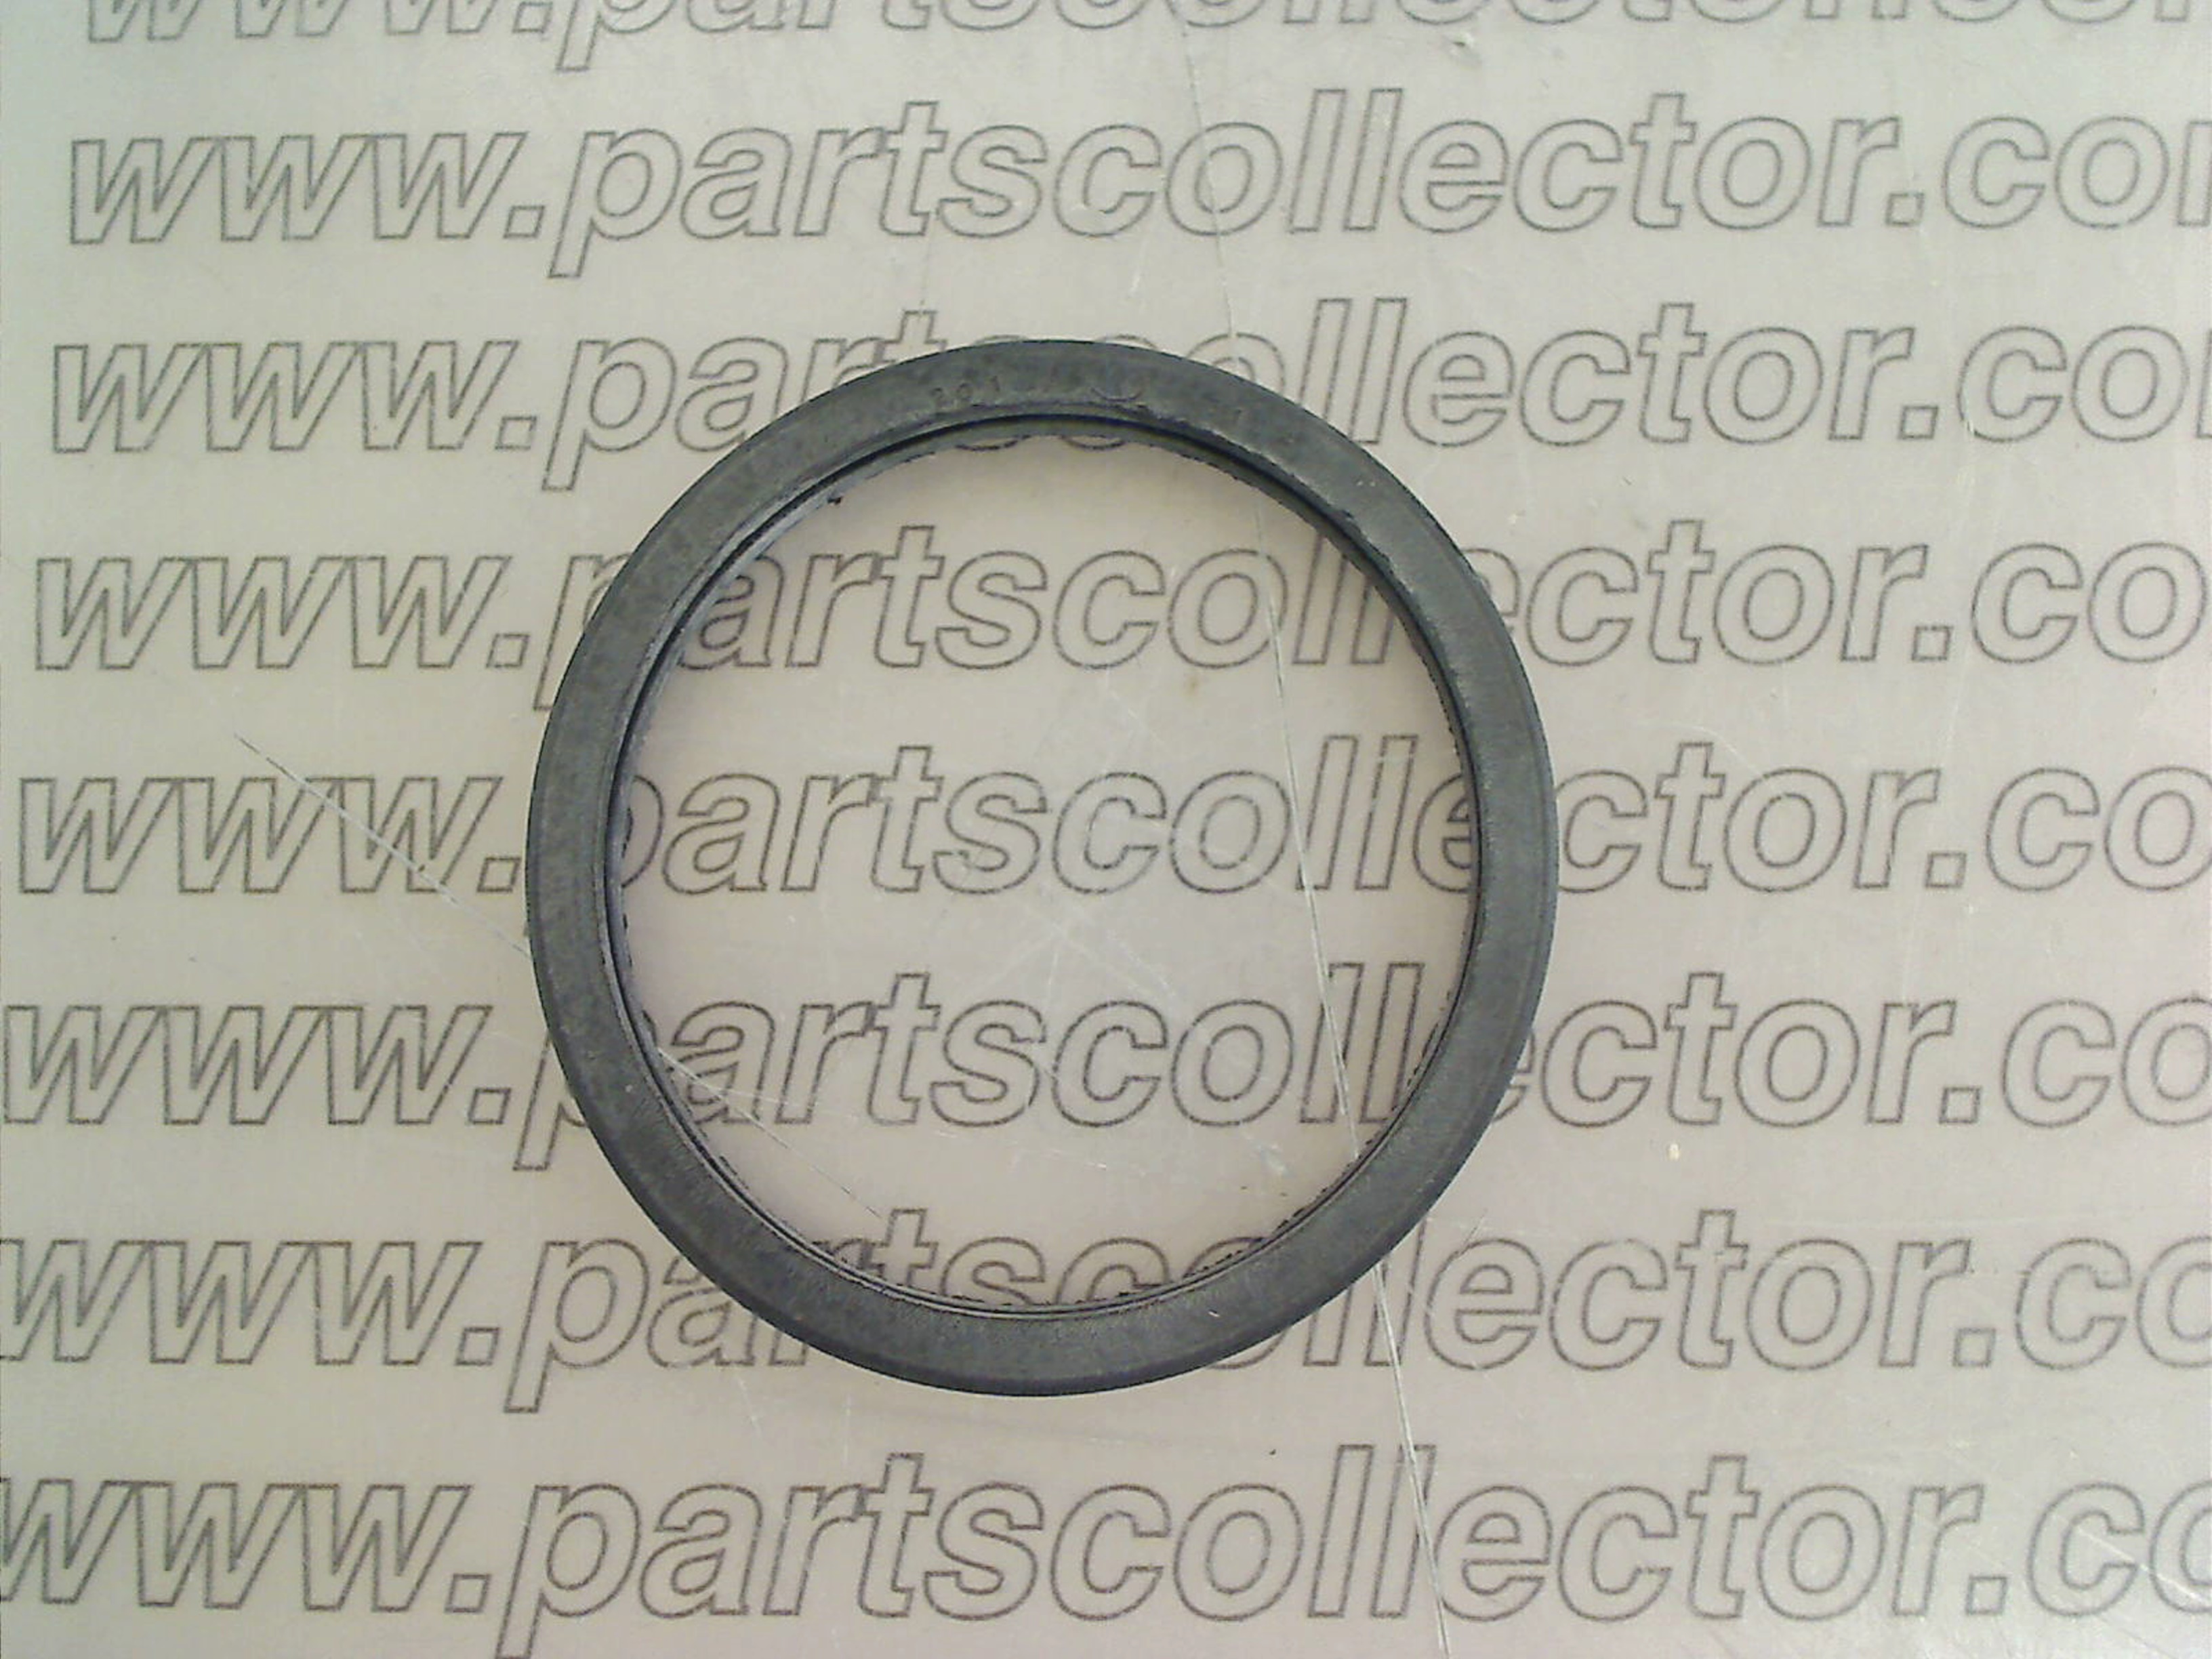 THERMOSTAT SEAL